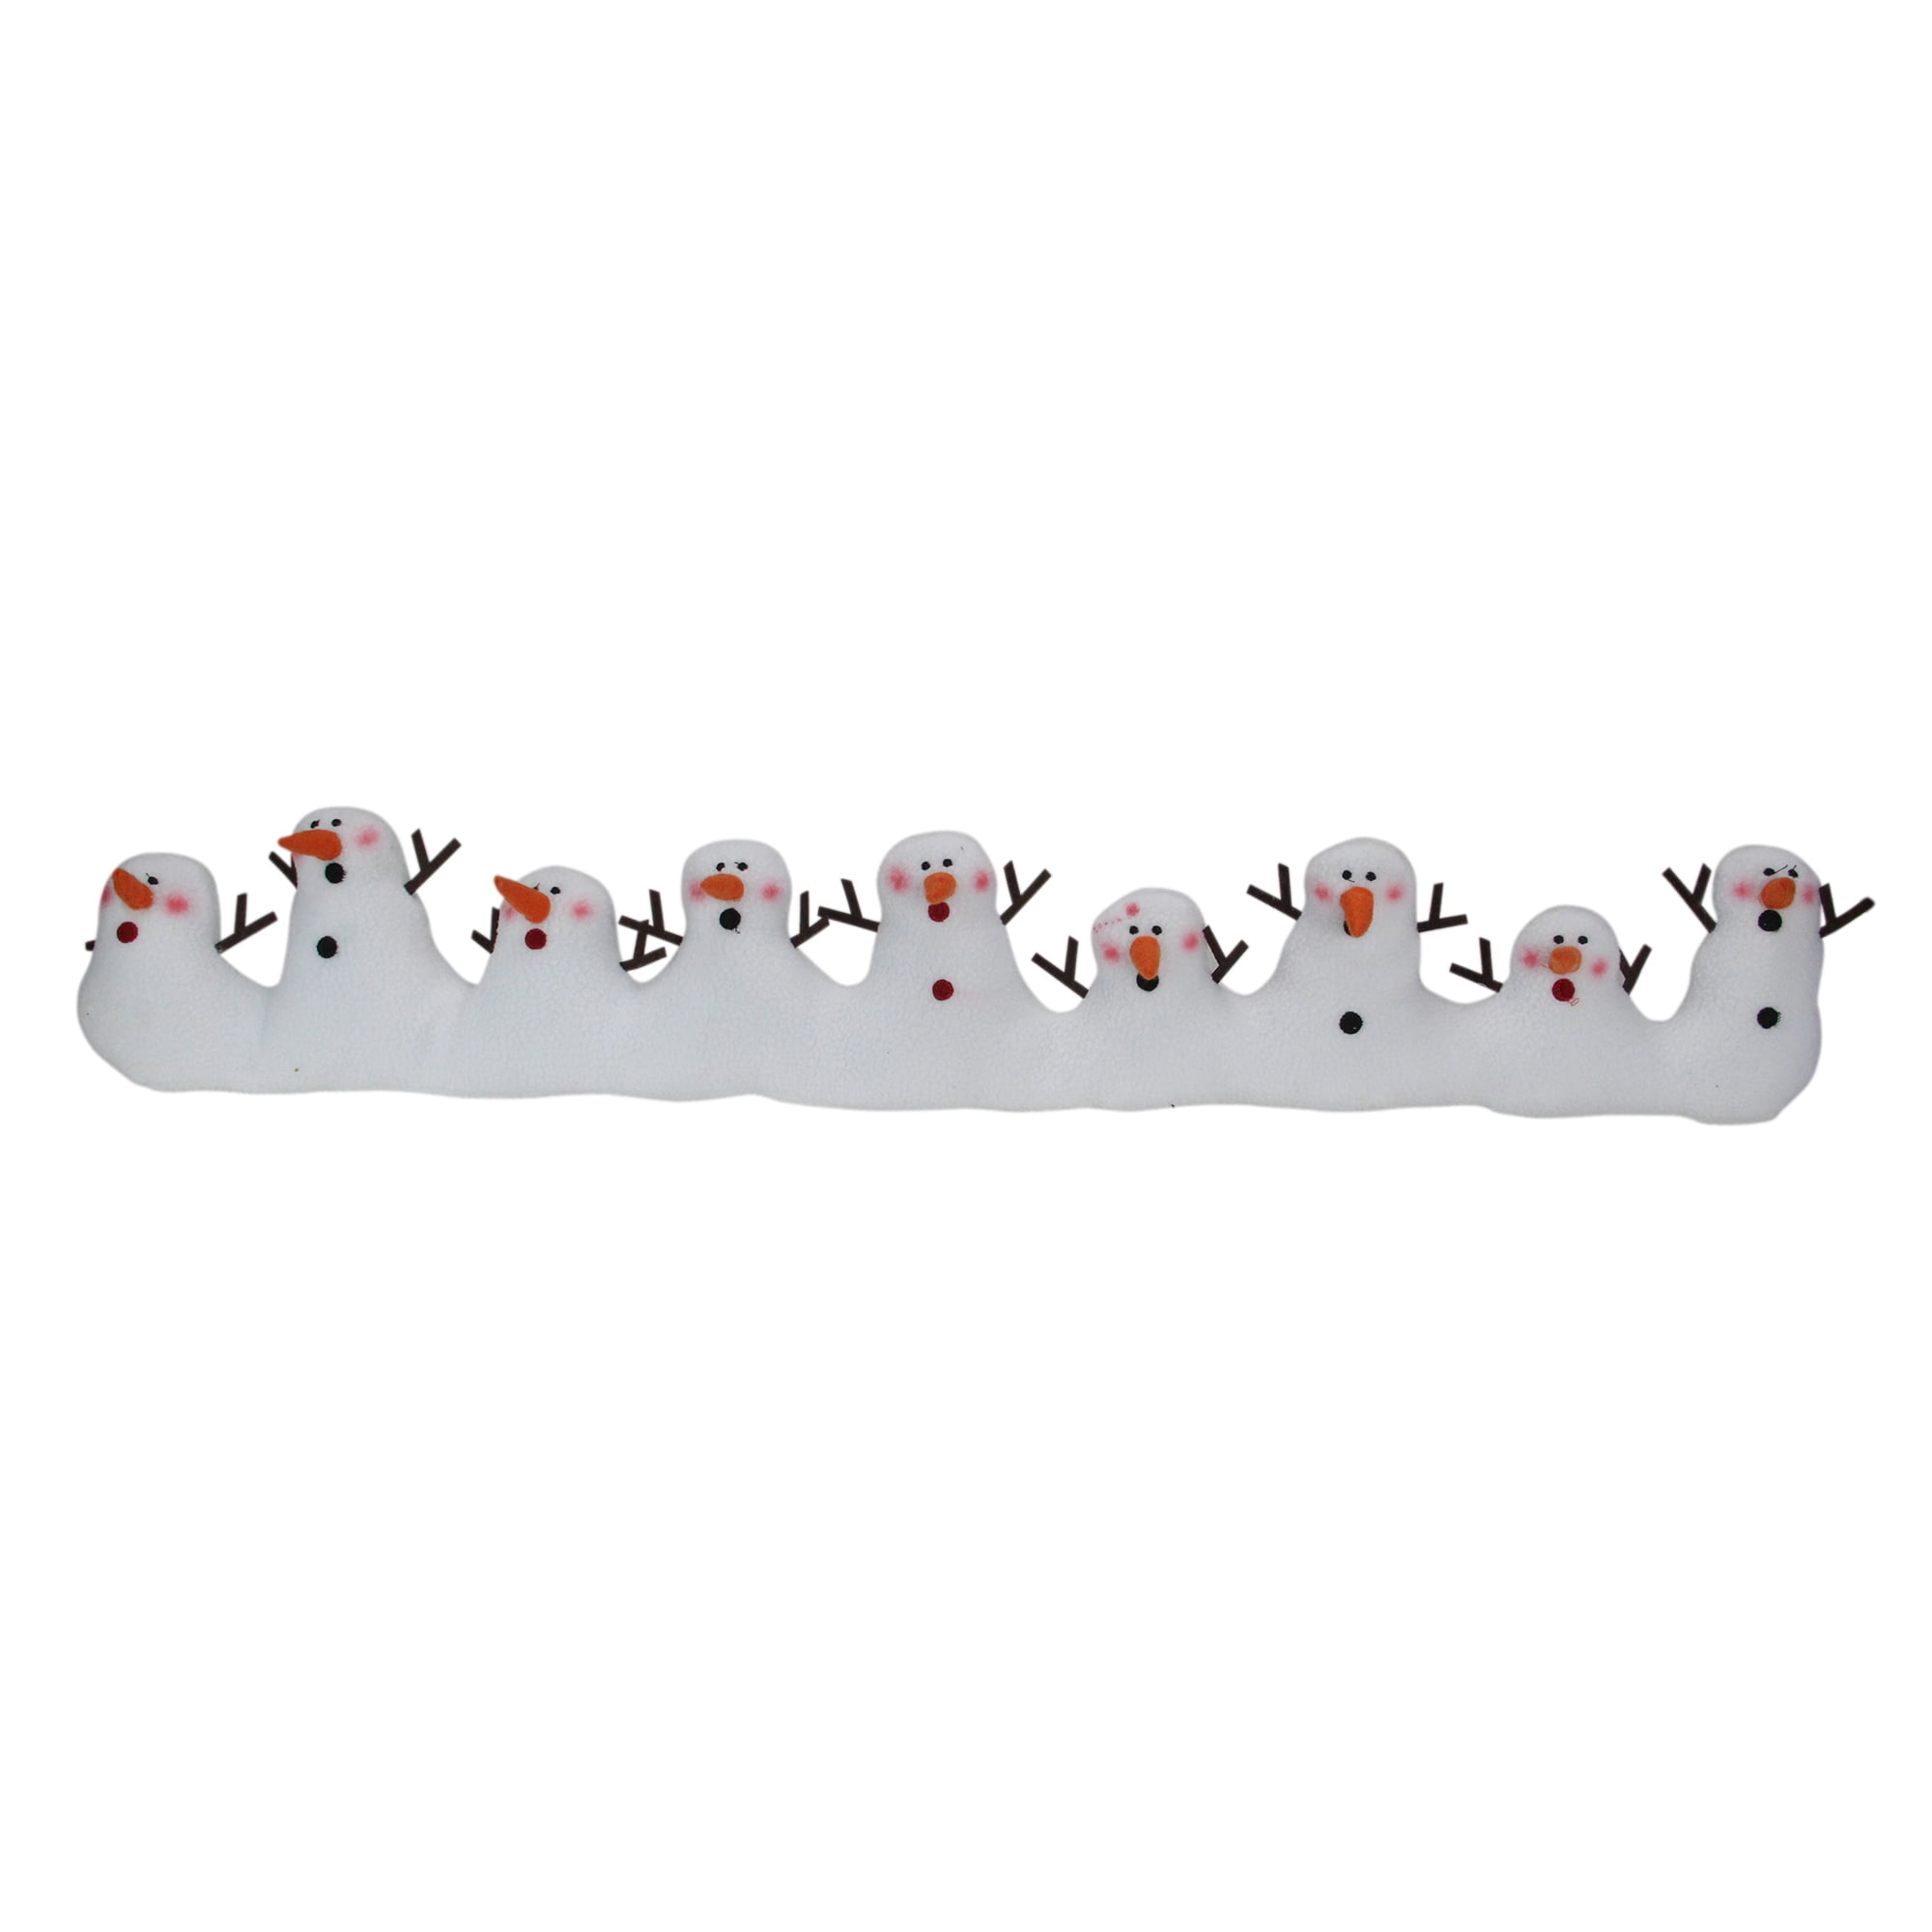 Light Up LED Draught Excluder Fabric Draft Stopper Soft Xmas Home Decor 88cm 